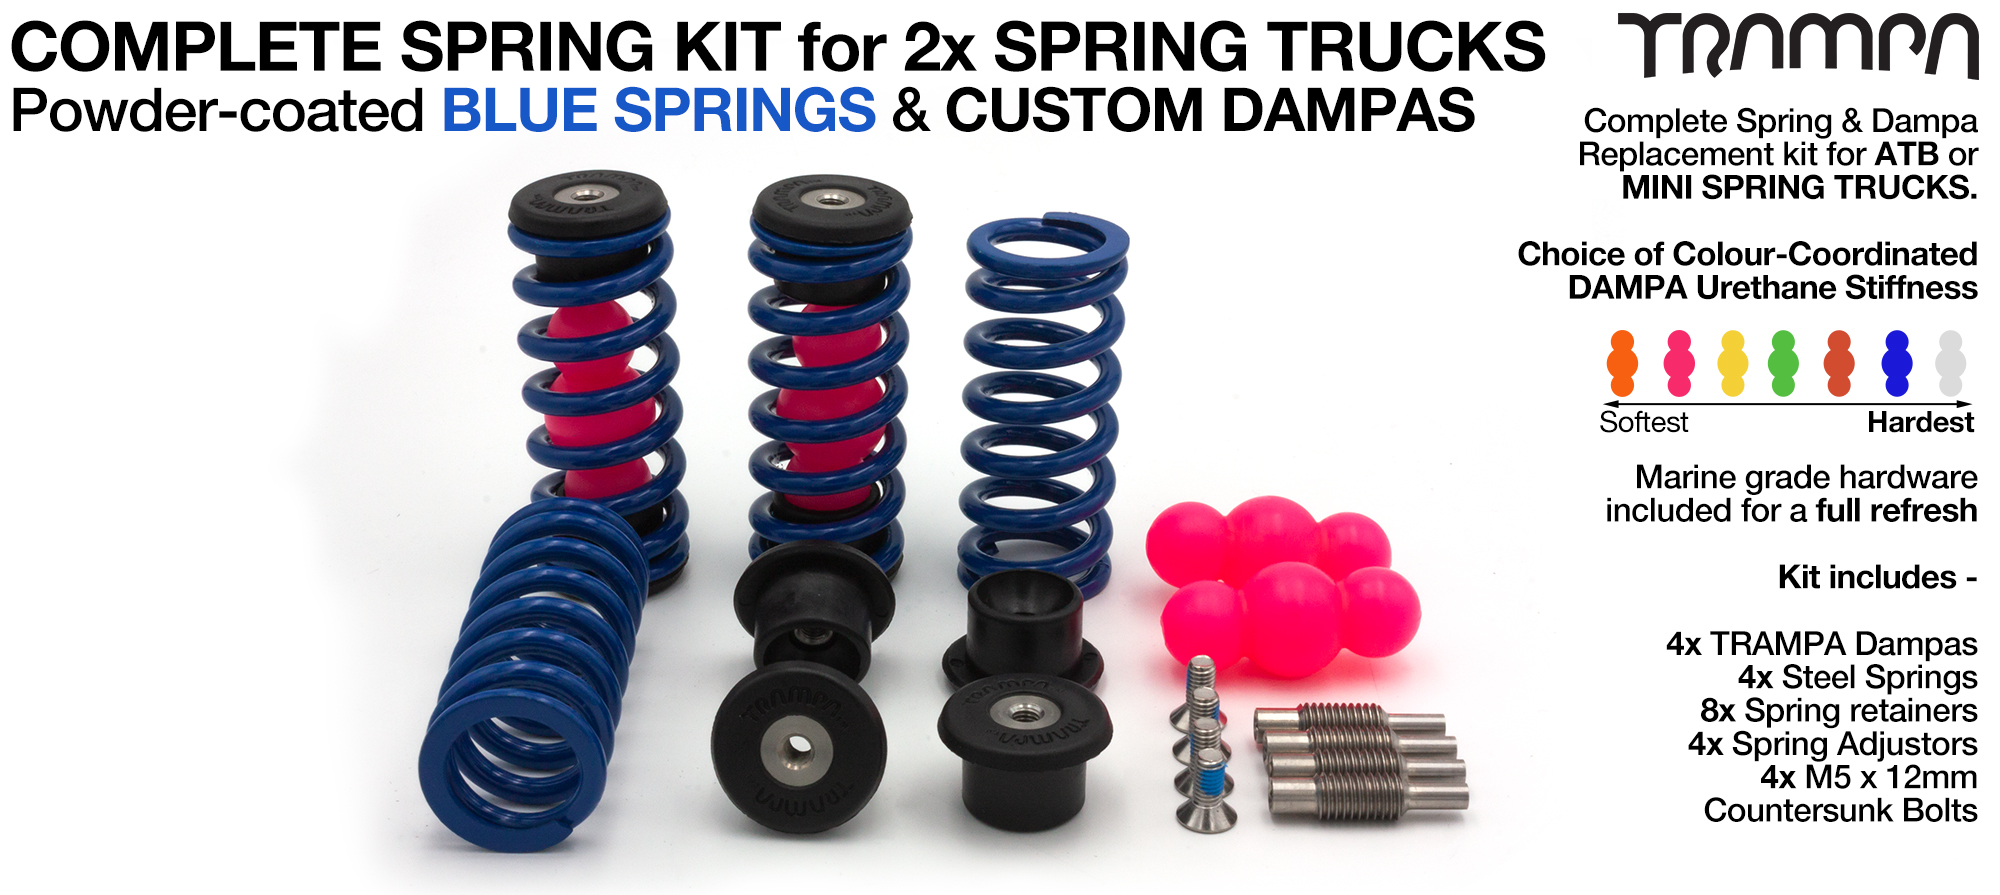 Complete Spring kit for 1x Board = 4x BLUE Springs 4x Dampa 8x Spring Retainers 4x Spring Adjuster & 4 M5x12mm Countersunk Bolt  